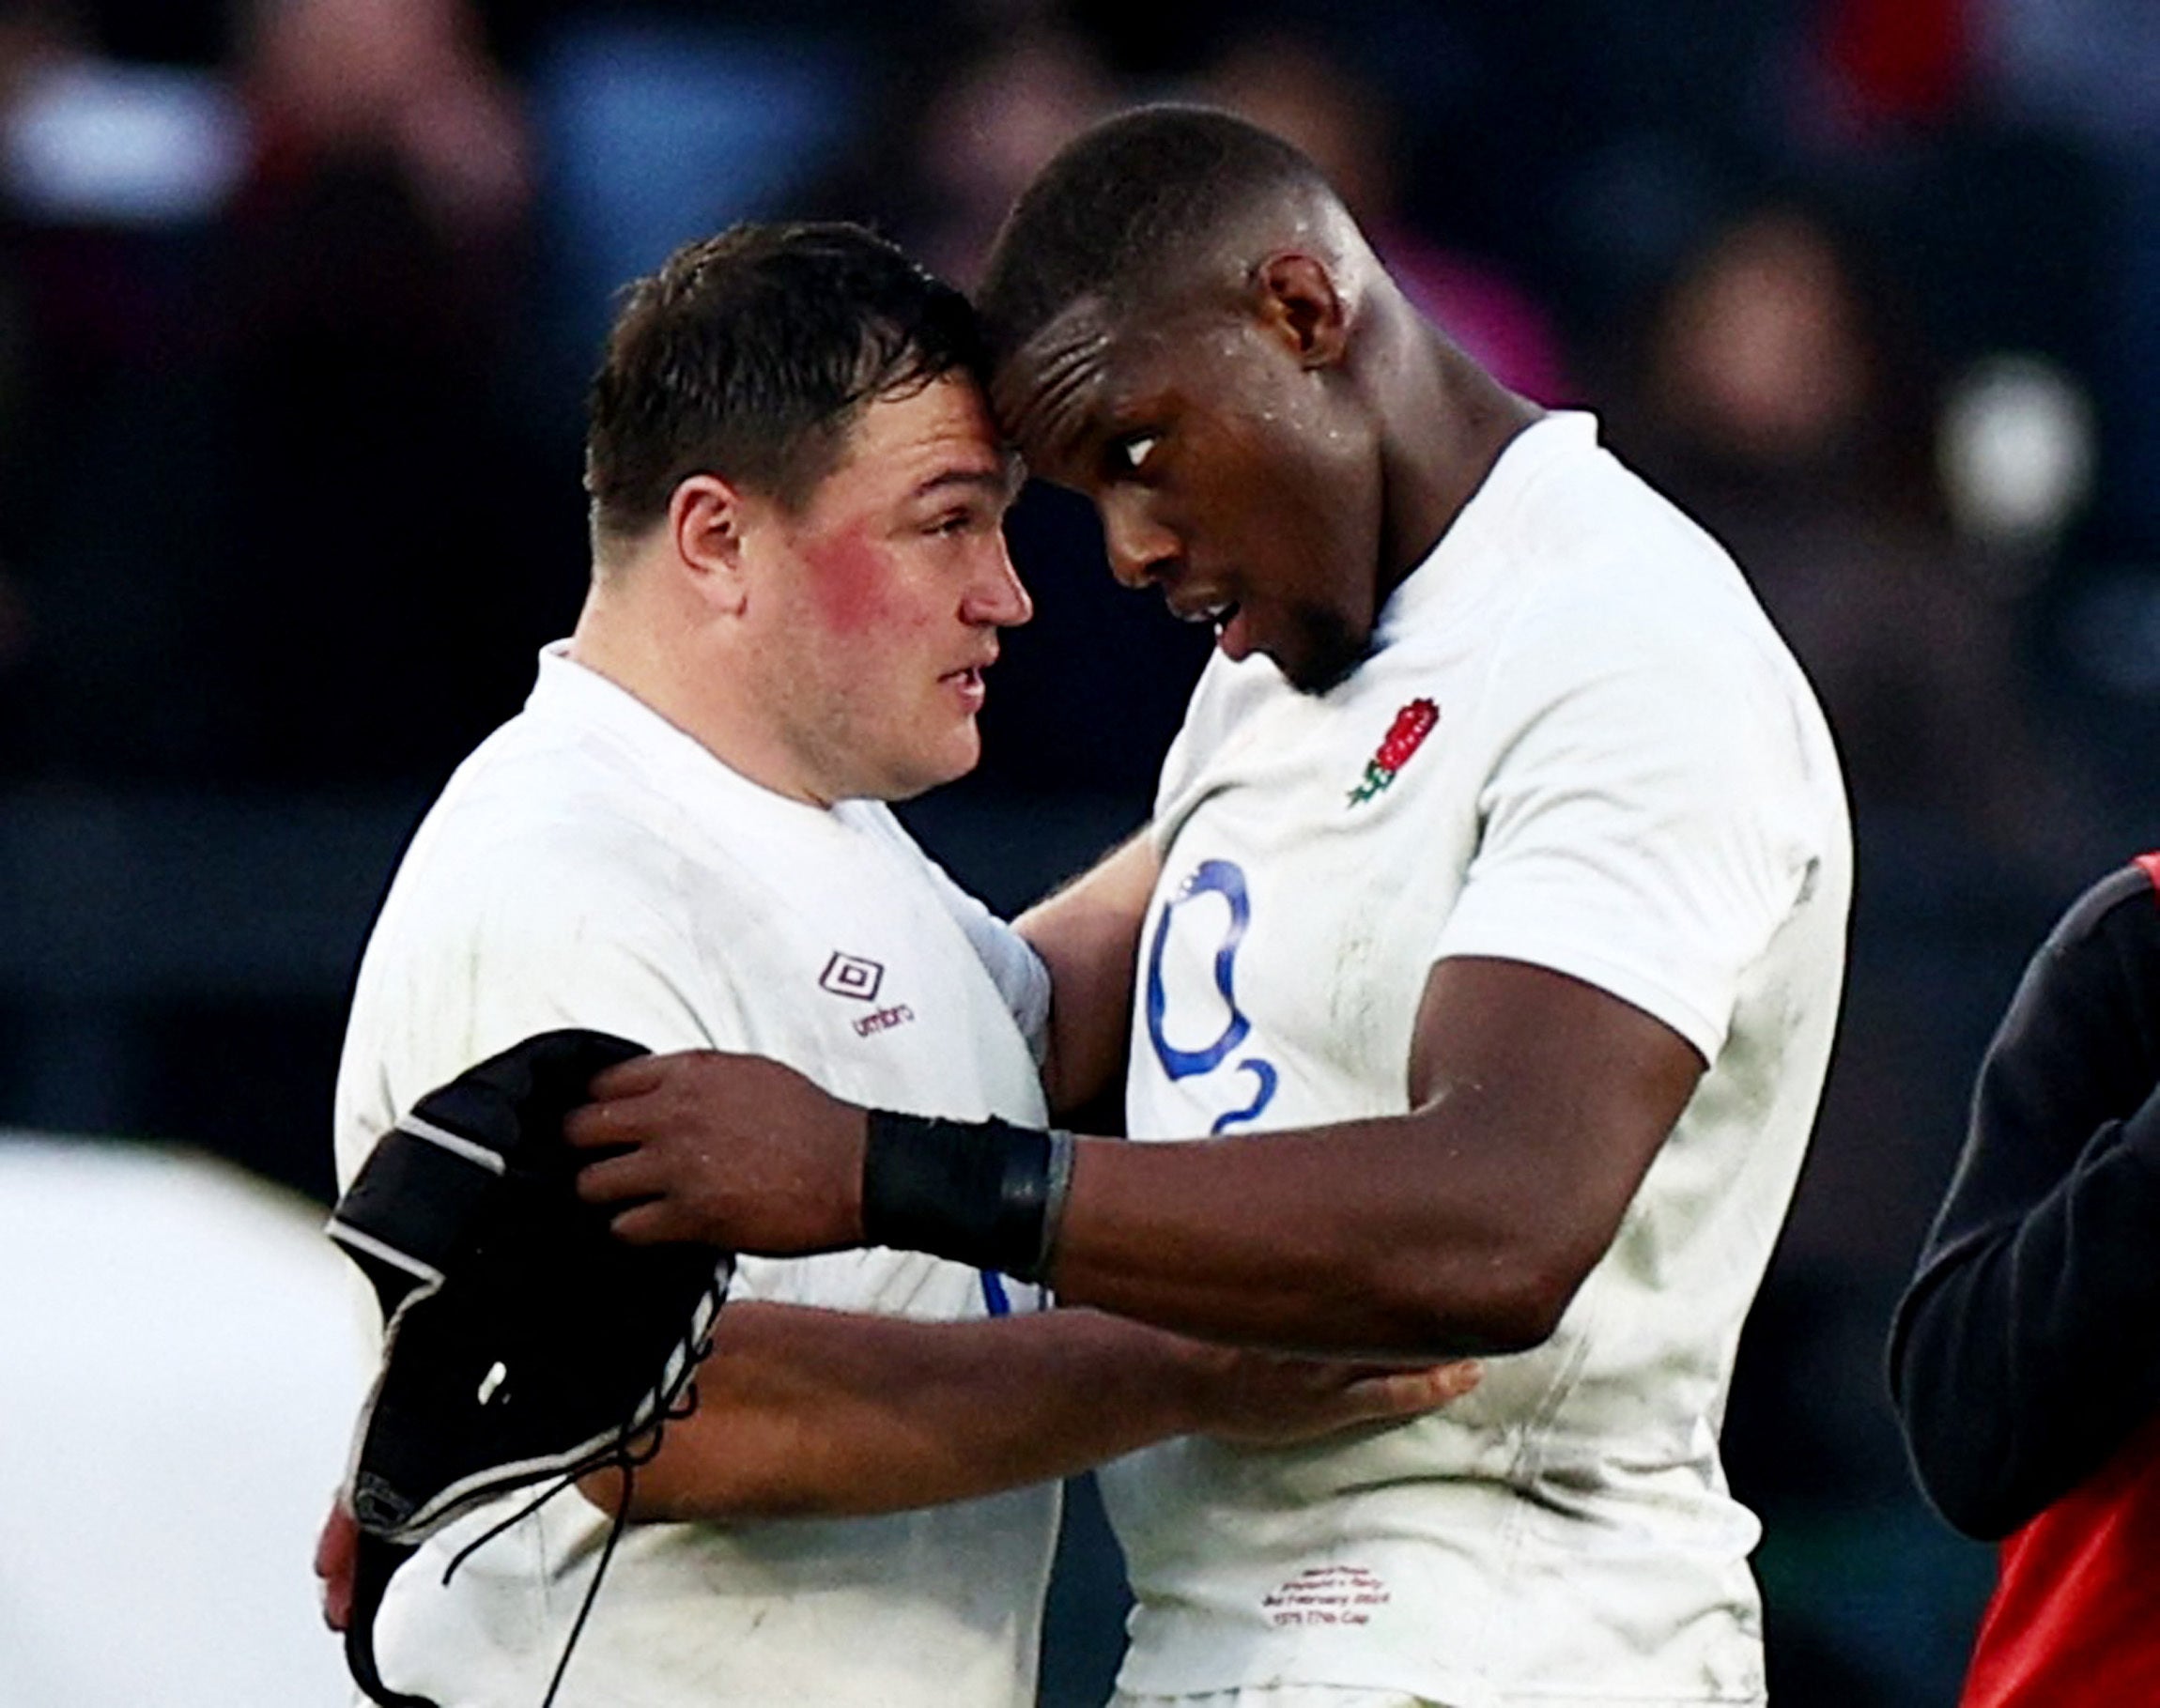 Jamie George and Maro Itoje have a post-match tete-a-tete